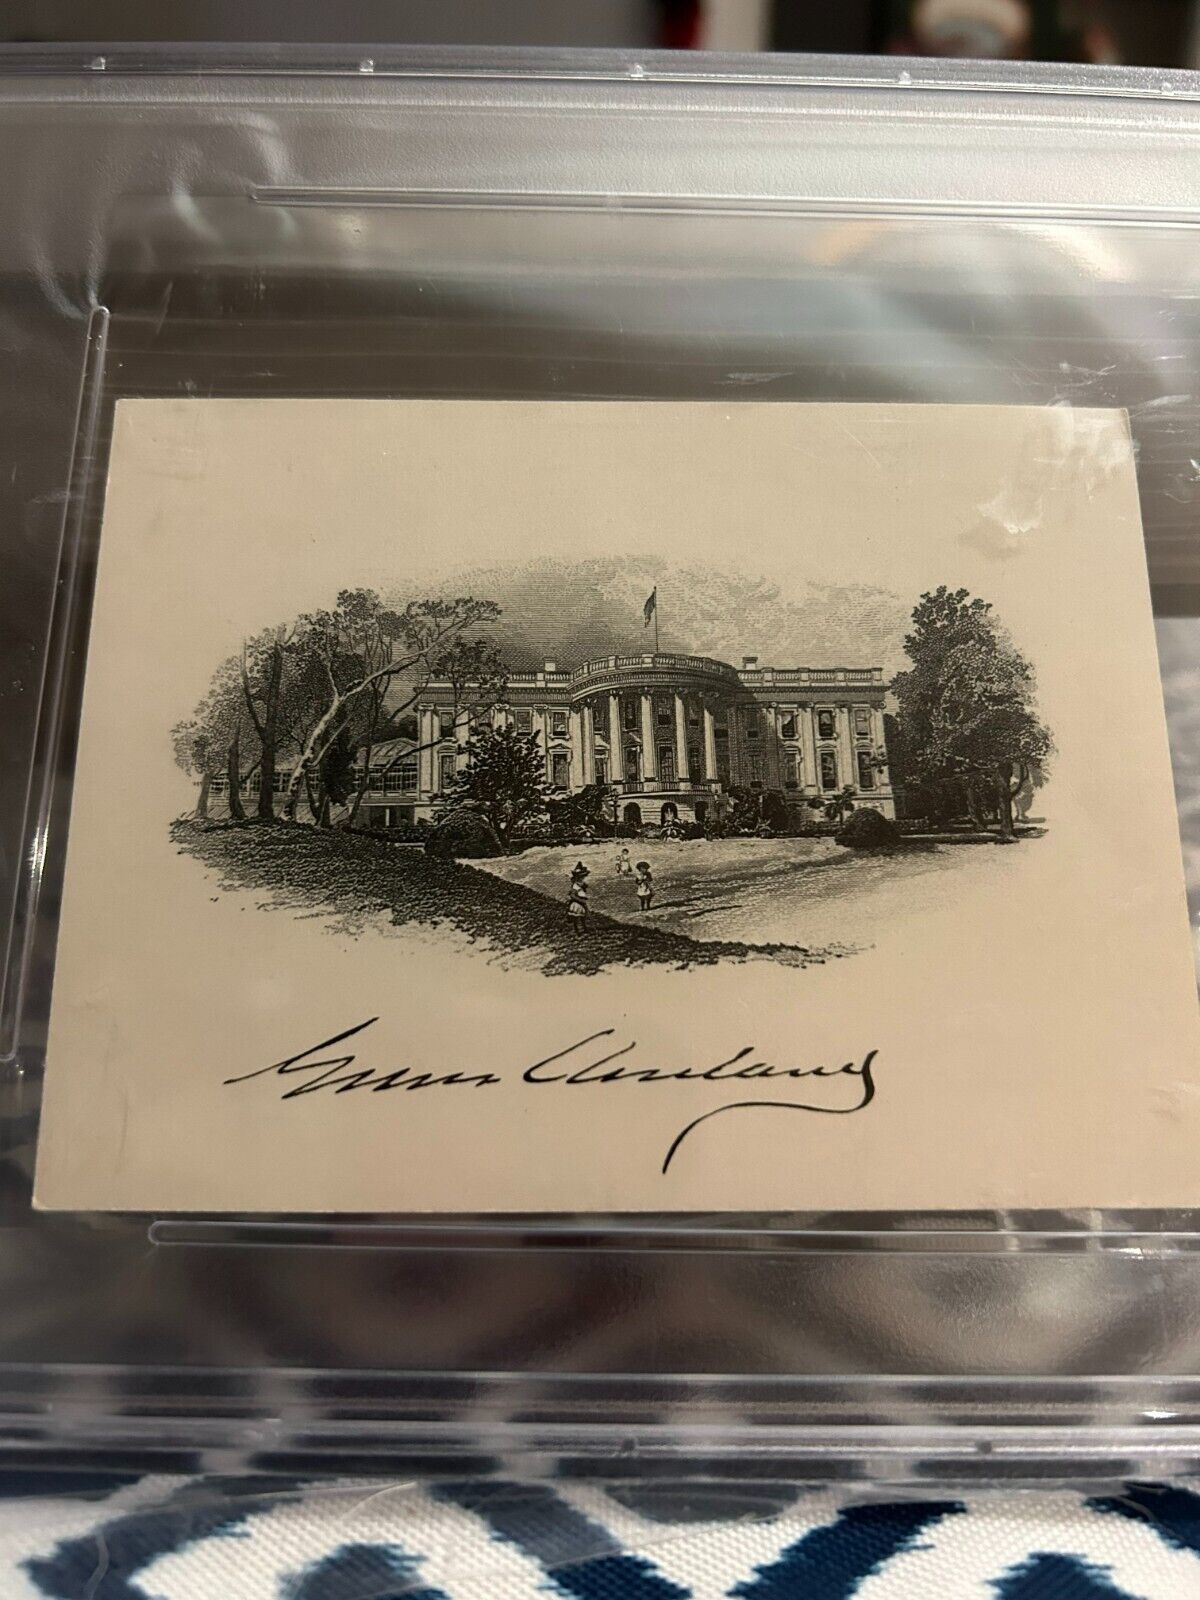 Pres. Grover Cleveland Signed Engraving of White House (PSA)